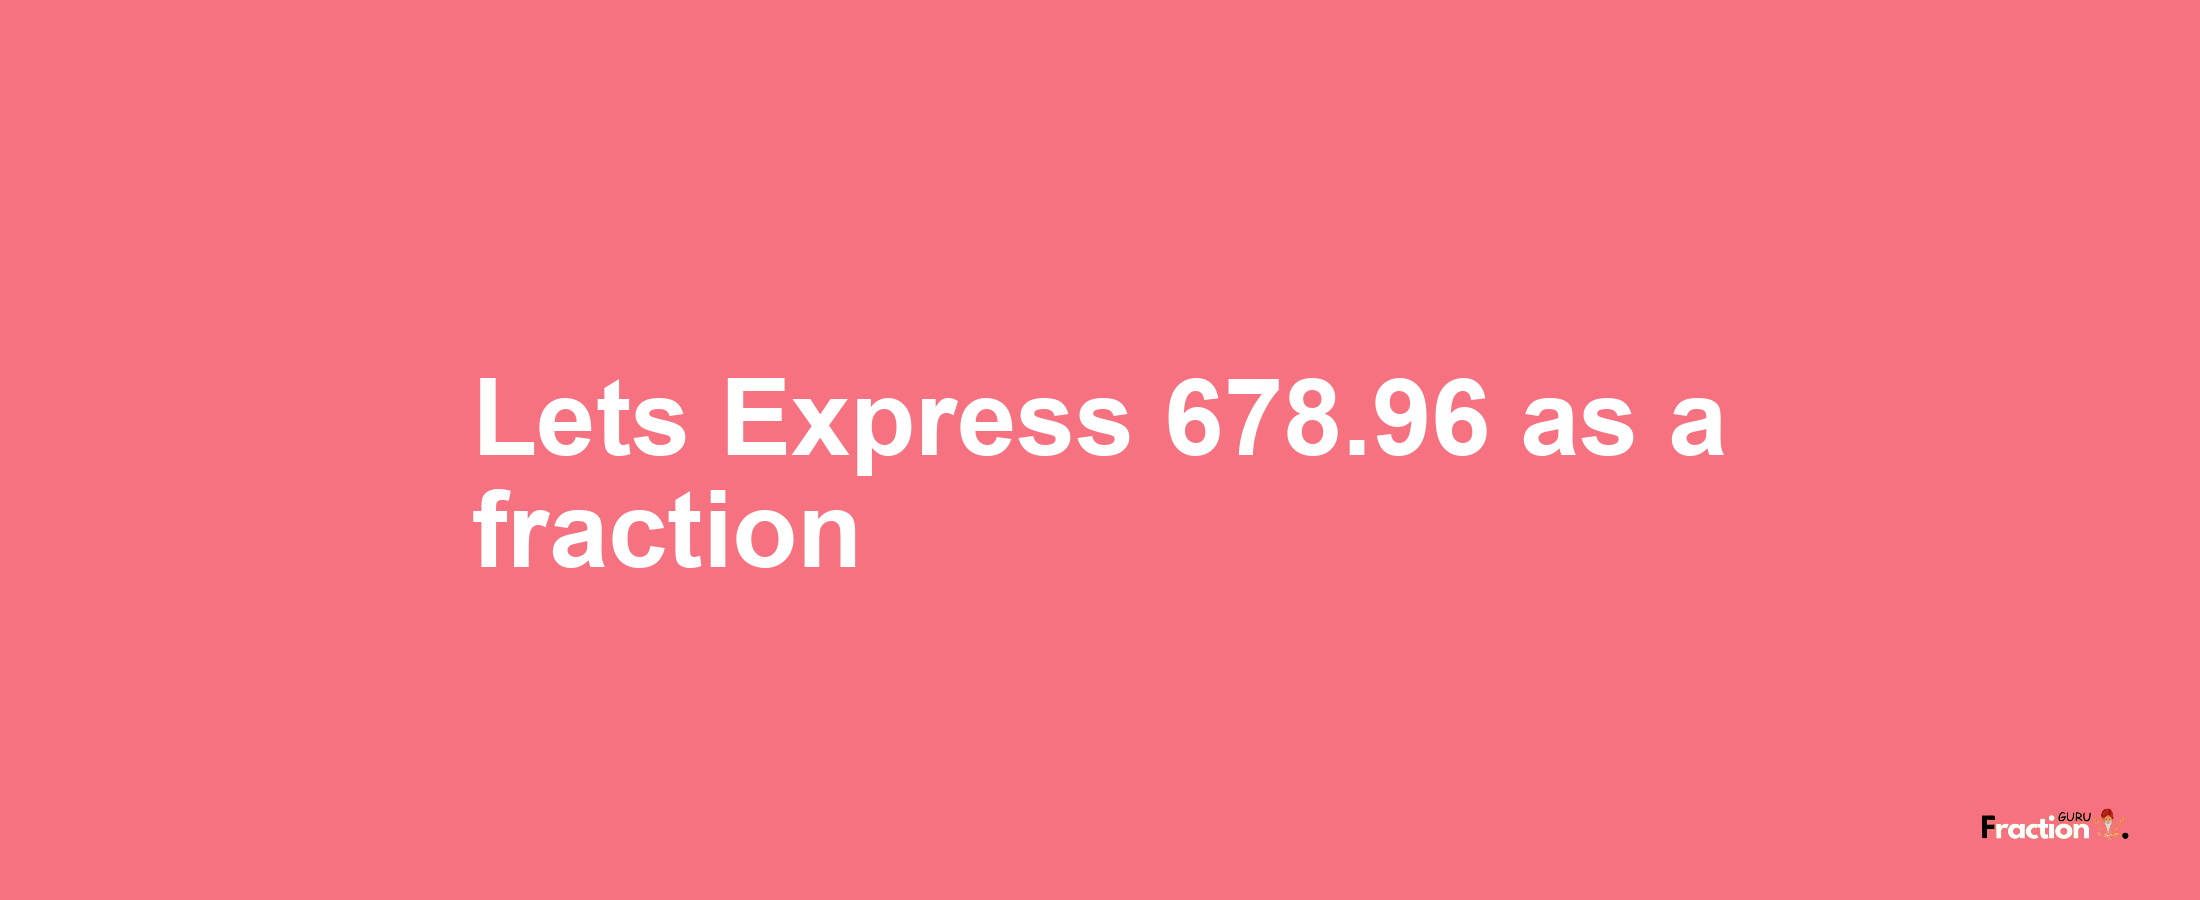 Lets Express 678.96 as afraction